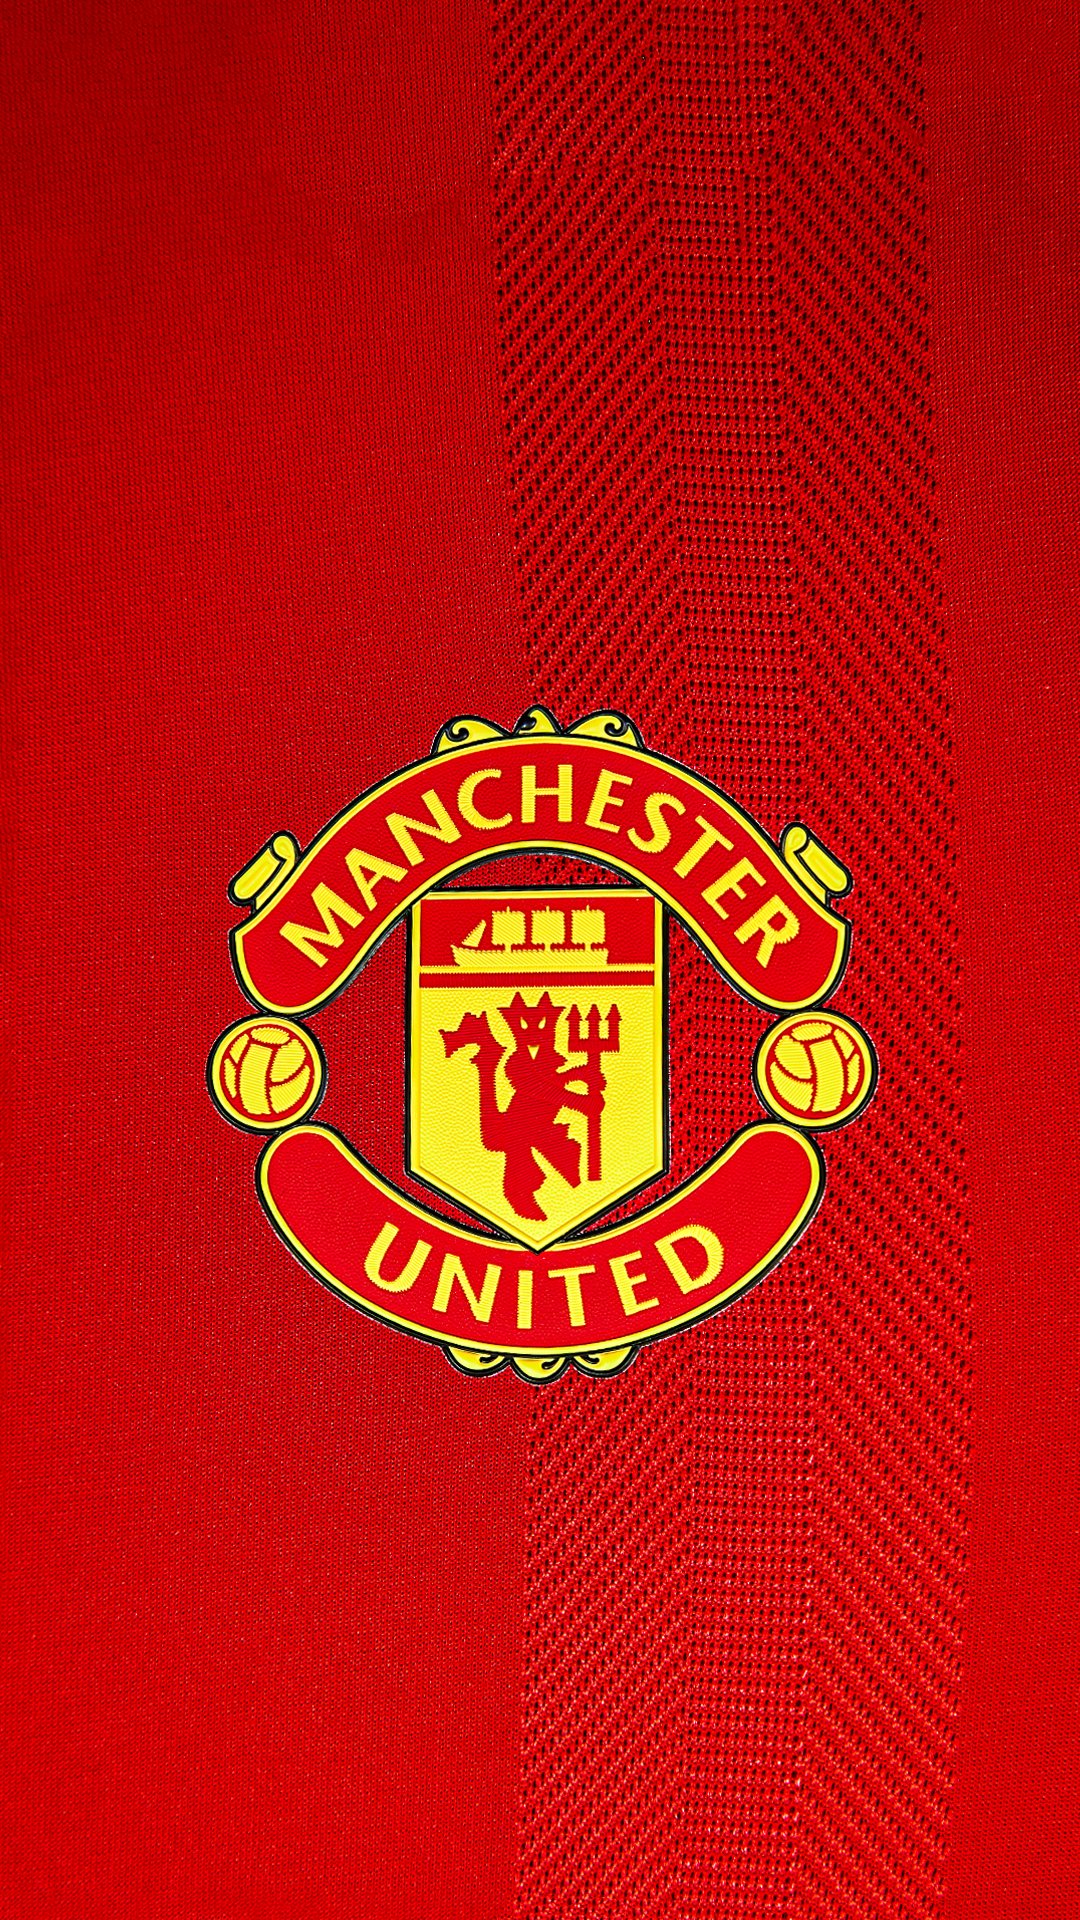 Manchester United wallpaper for every matchday!